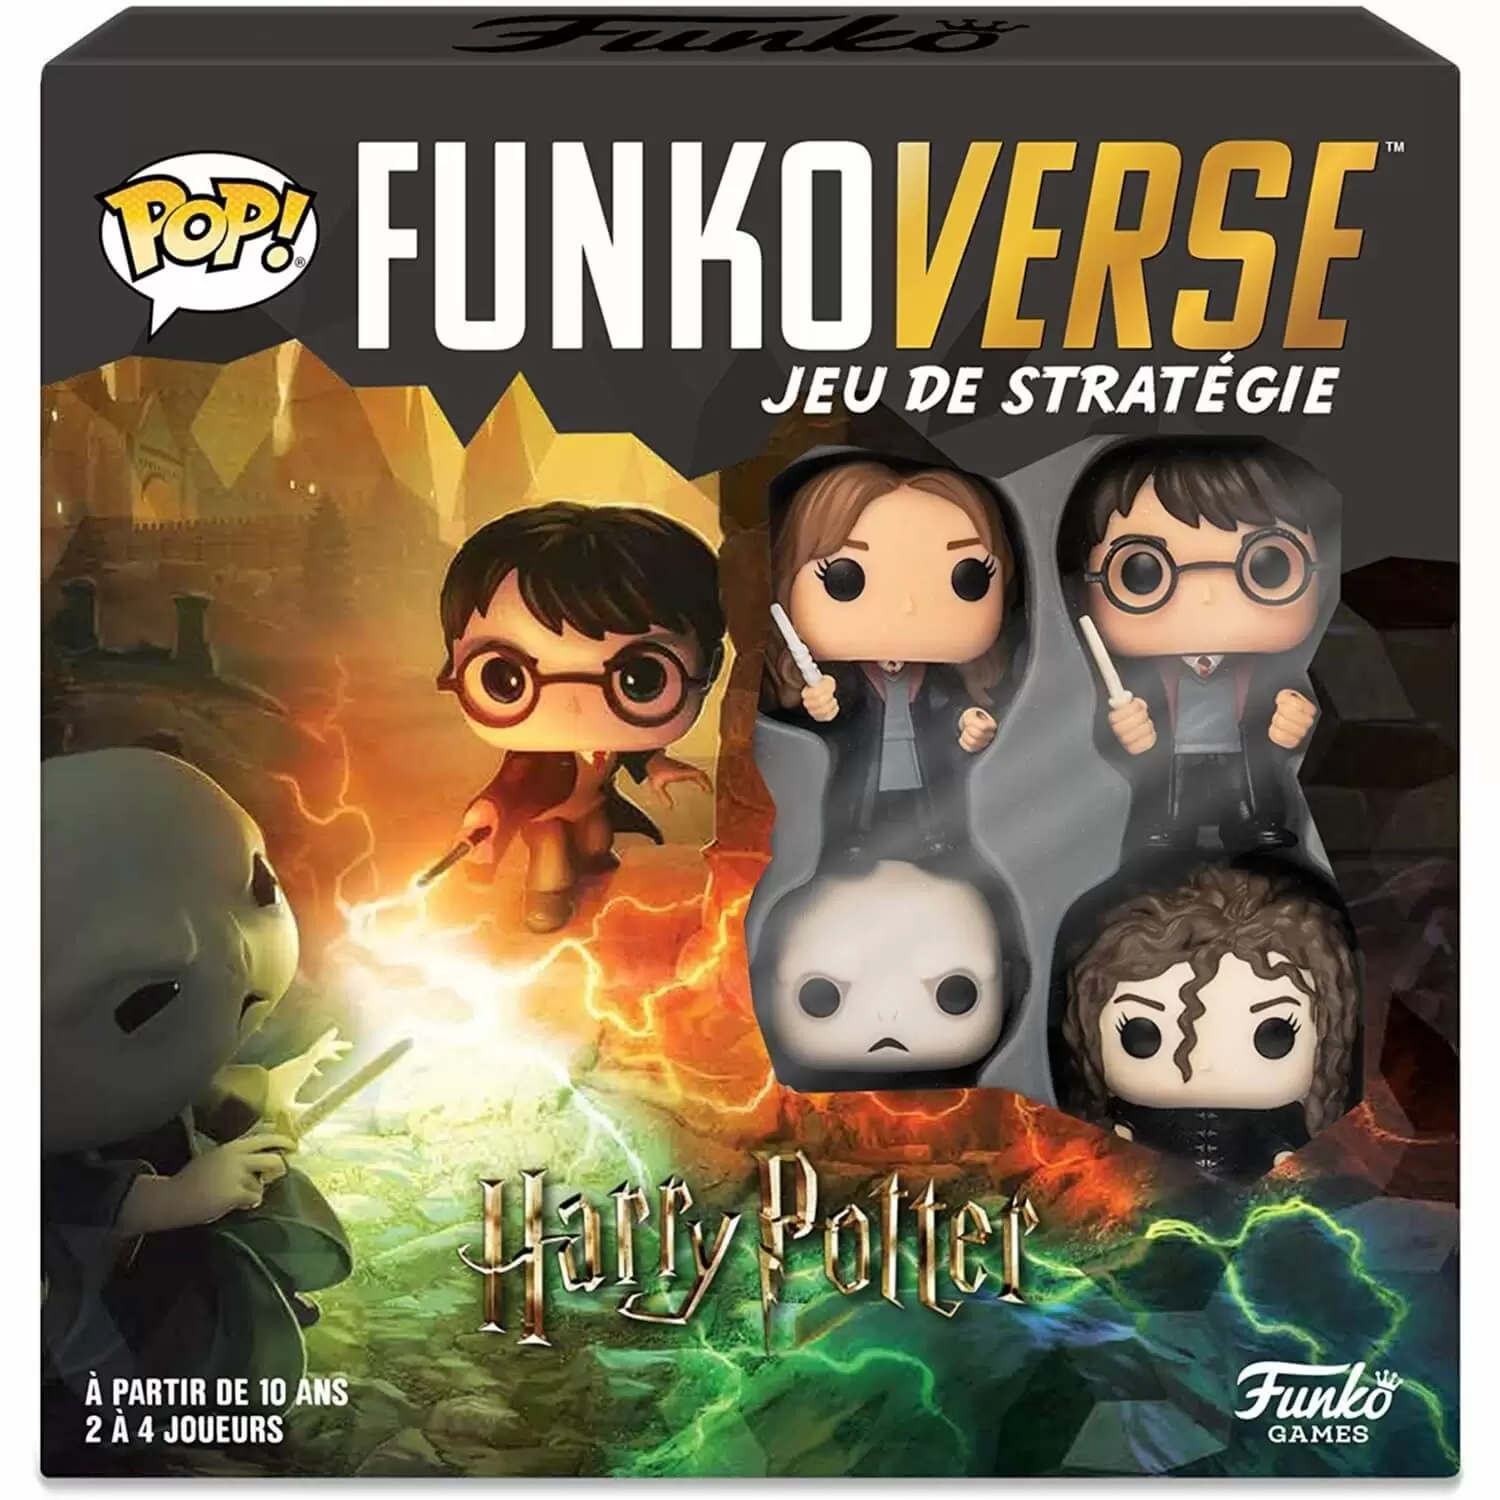 Funko Games - Funkoverse - Harry Potter Strategy Game 4 Players